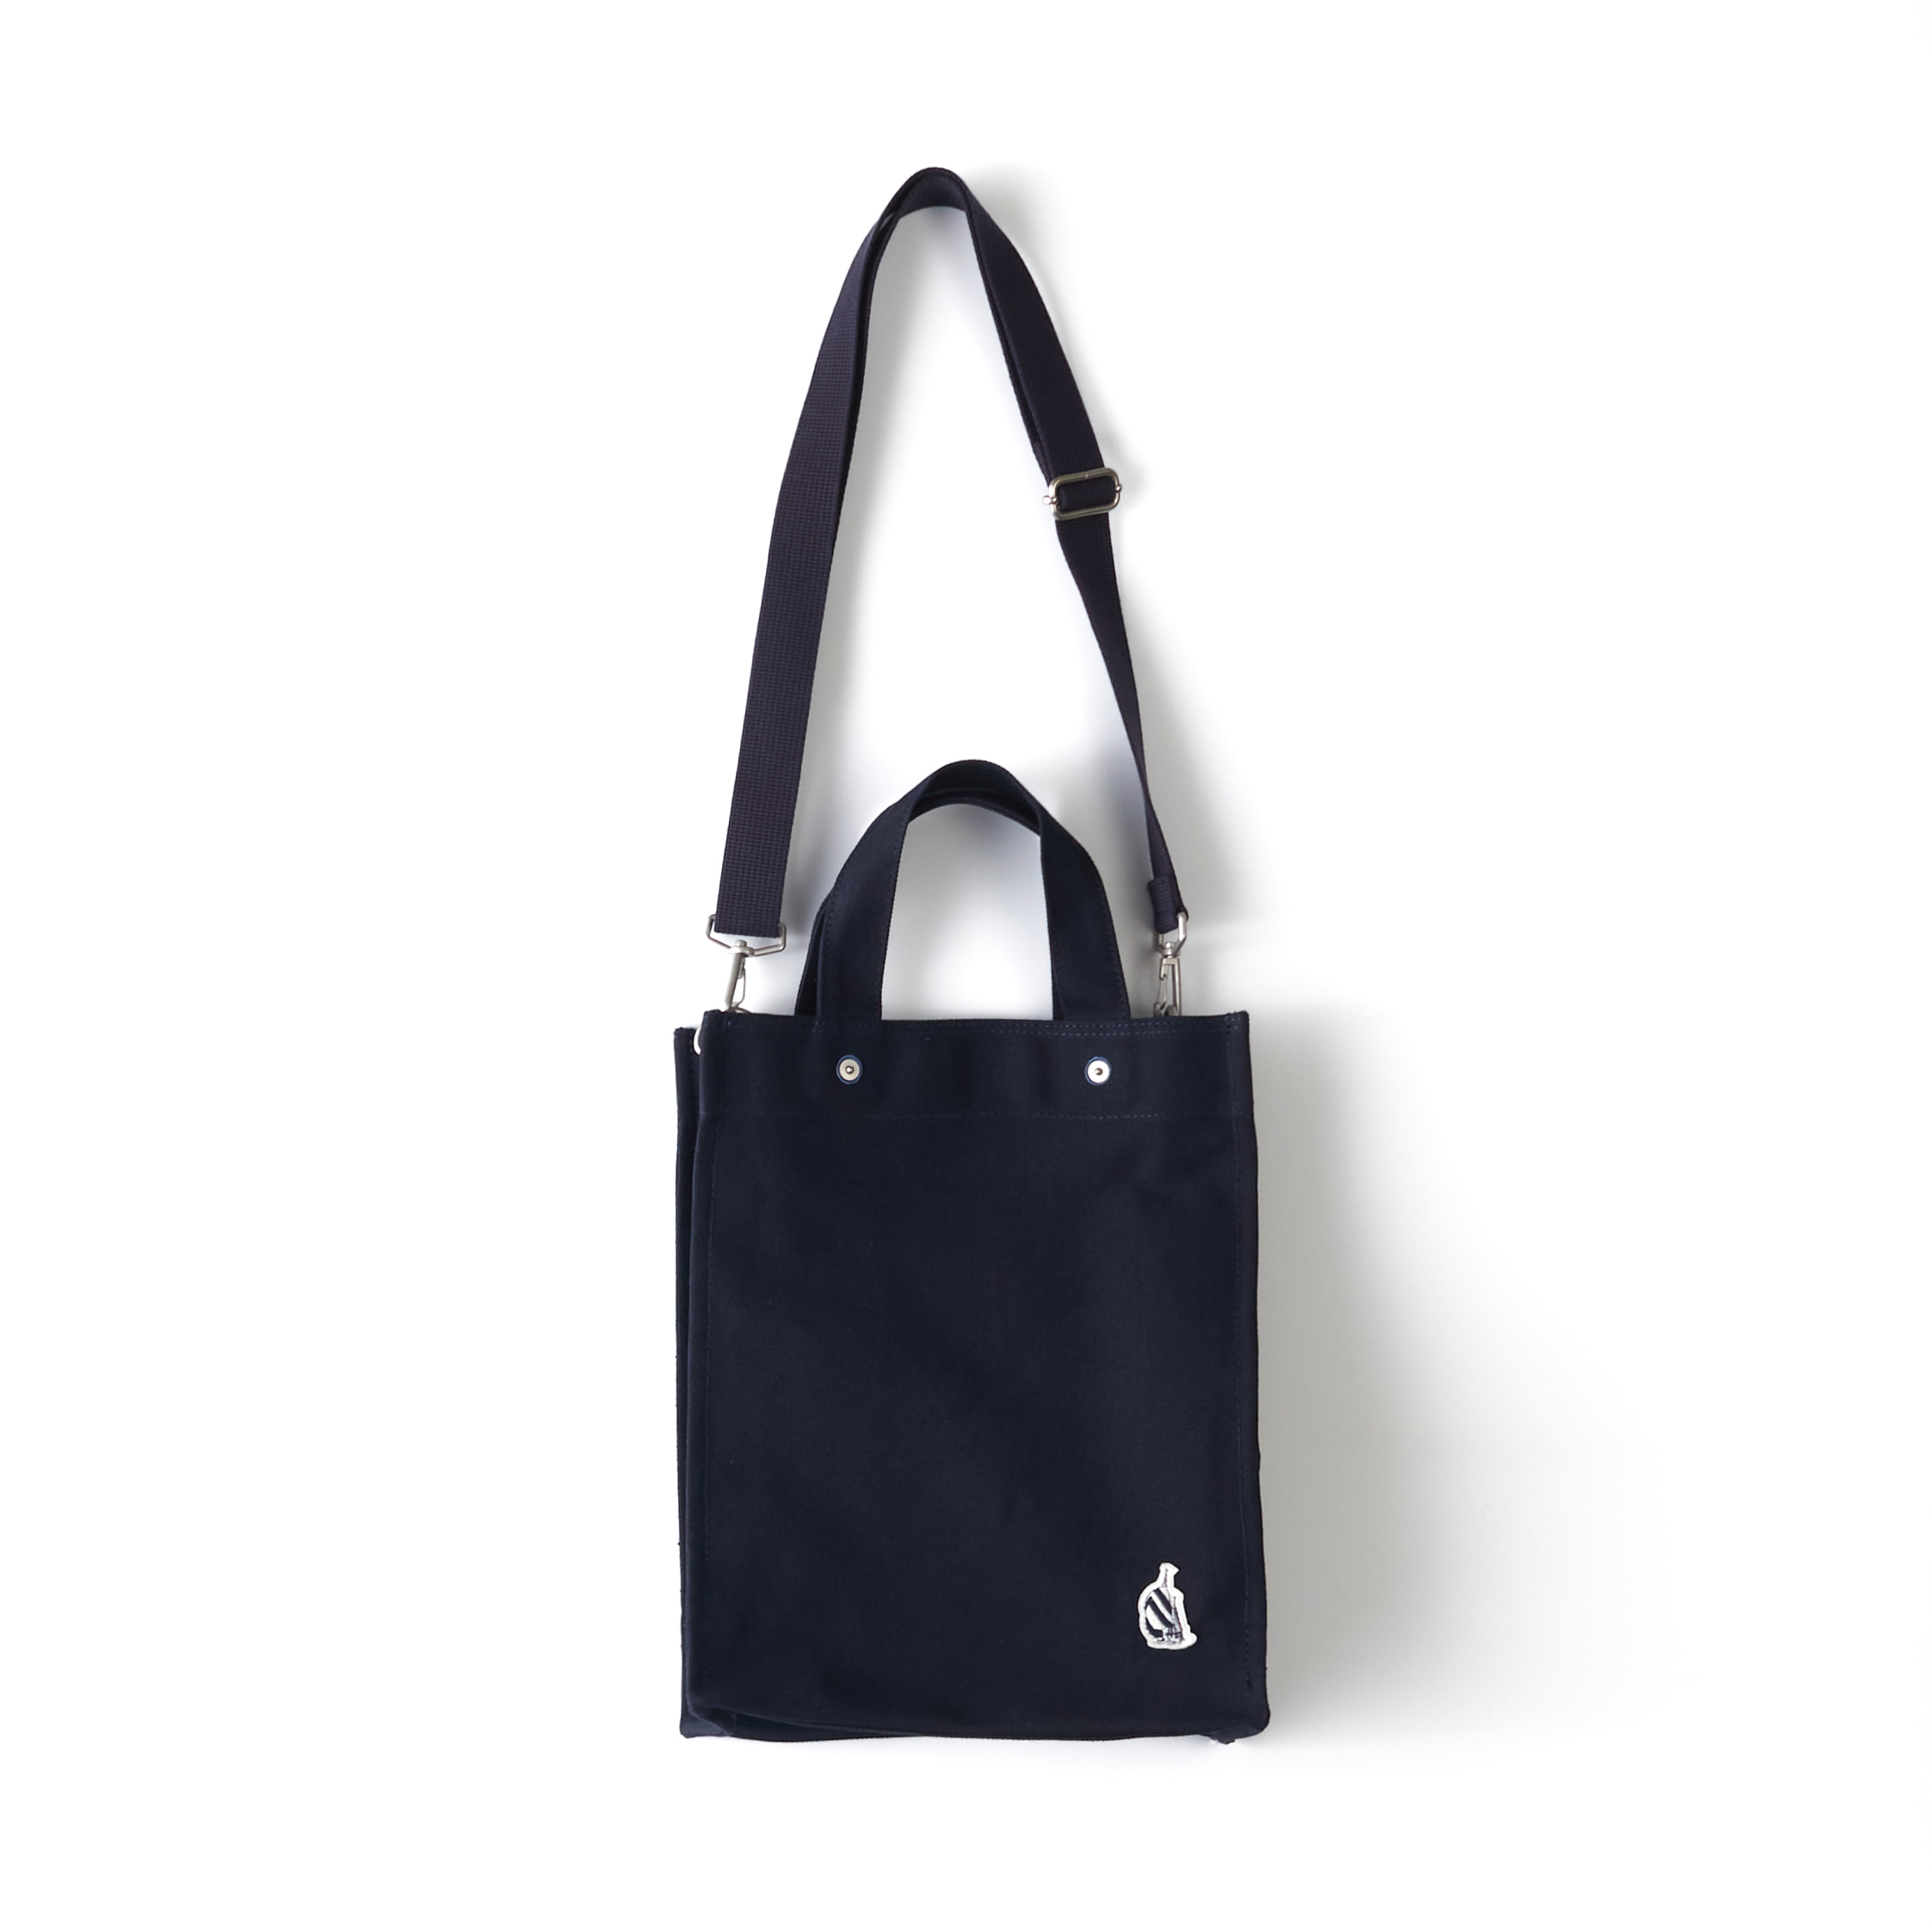 POINT TOTE BAG 011 NAVY